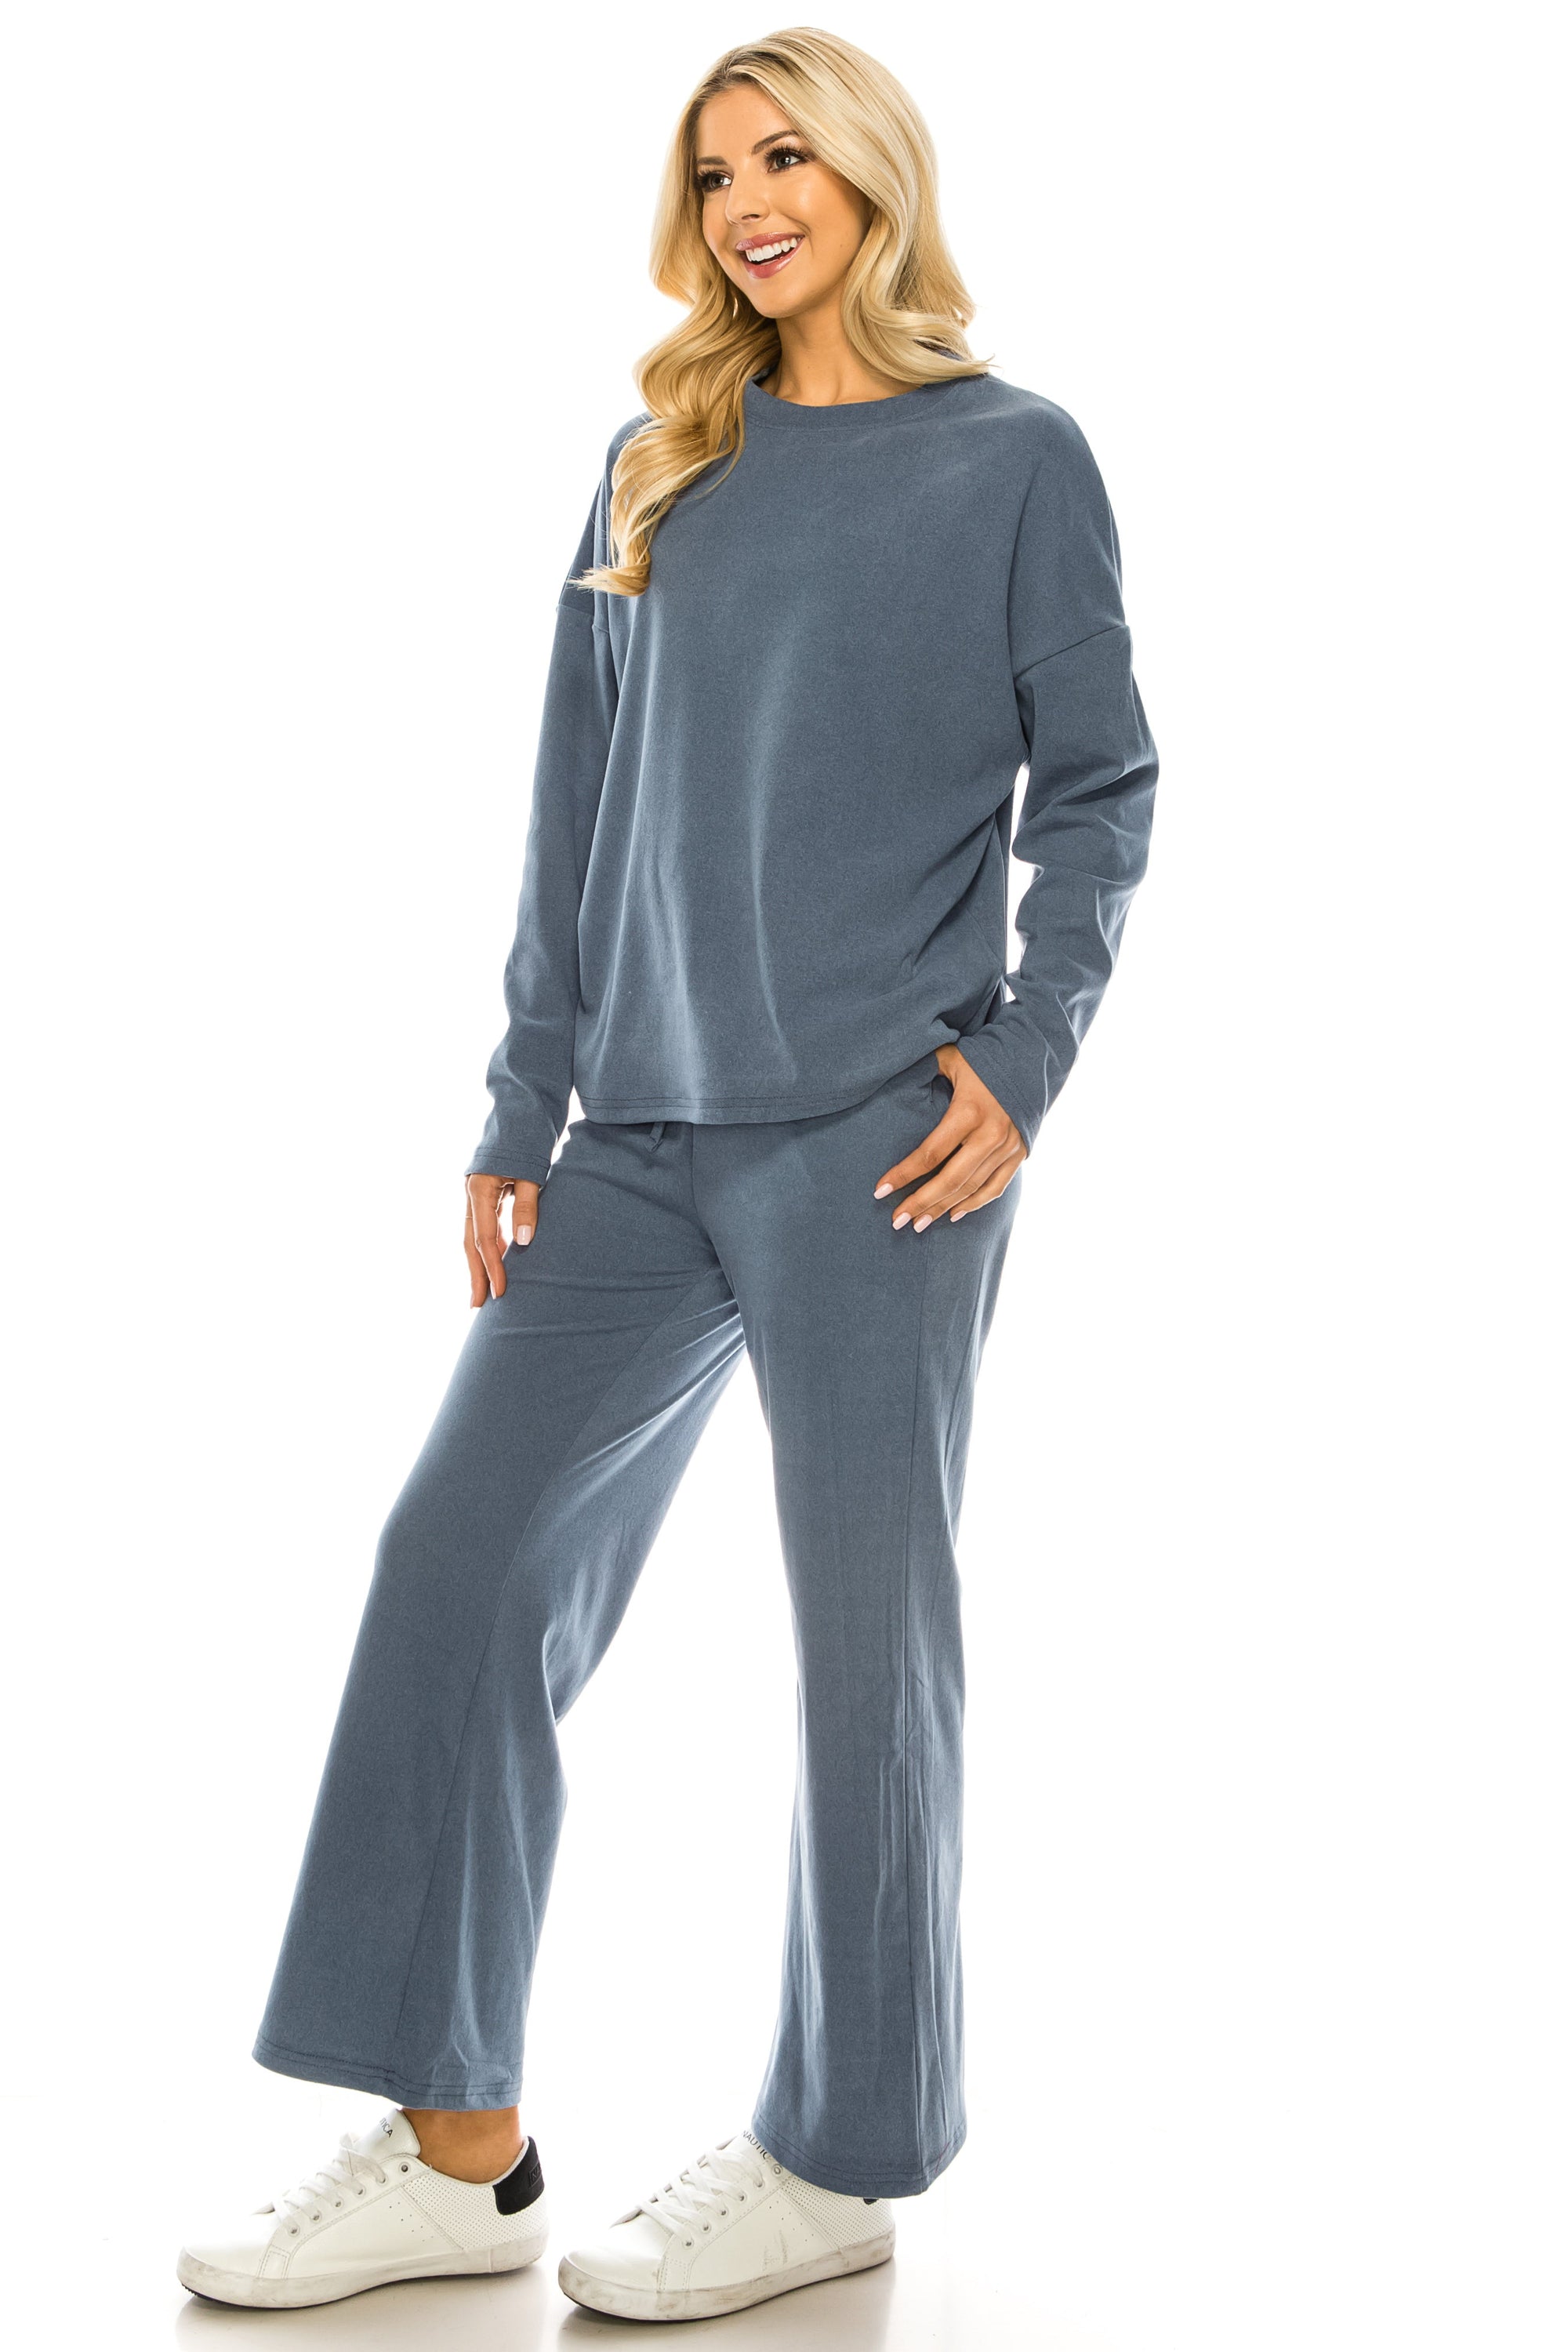 Haute Edition Women's Knit Lounge Set with Sweatshirt and Flared Pant Daily Haute